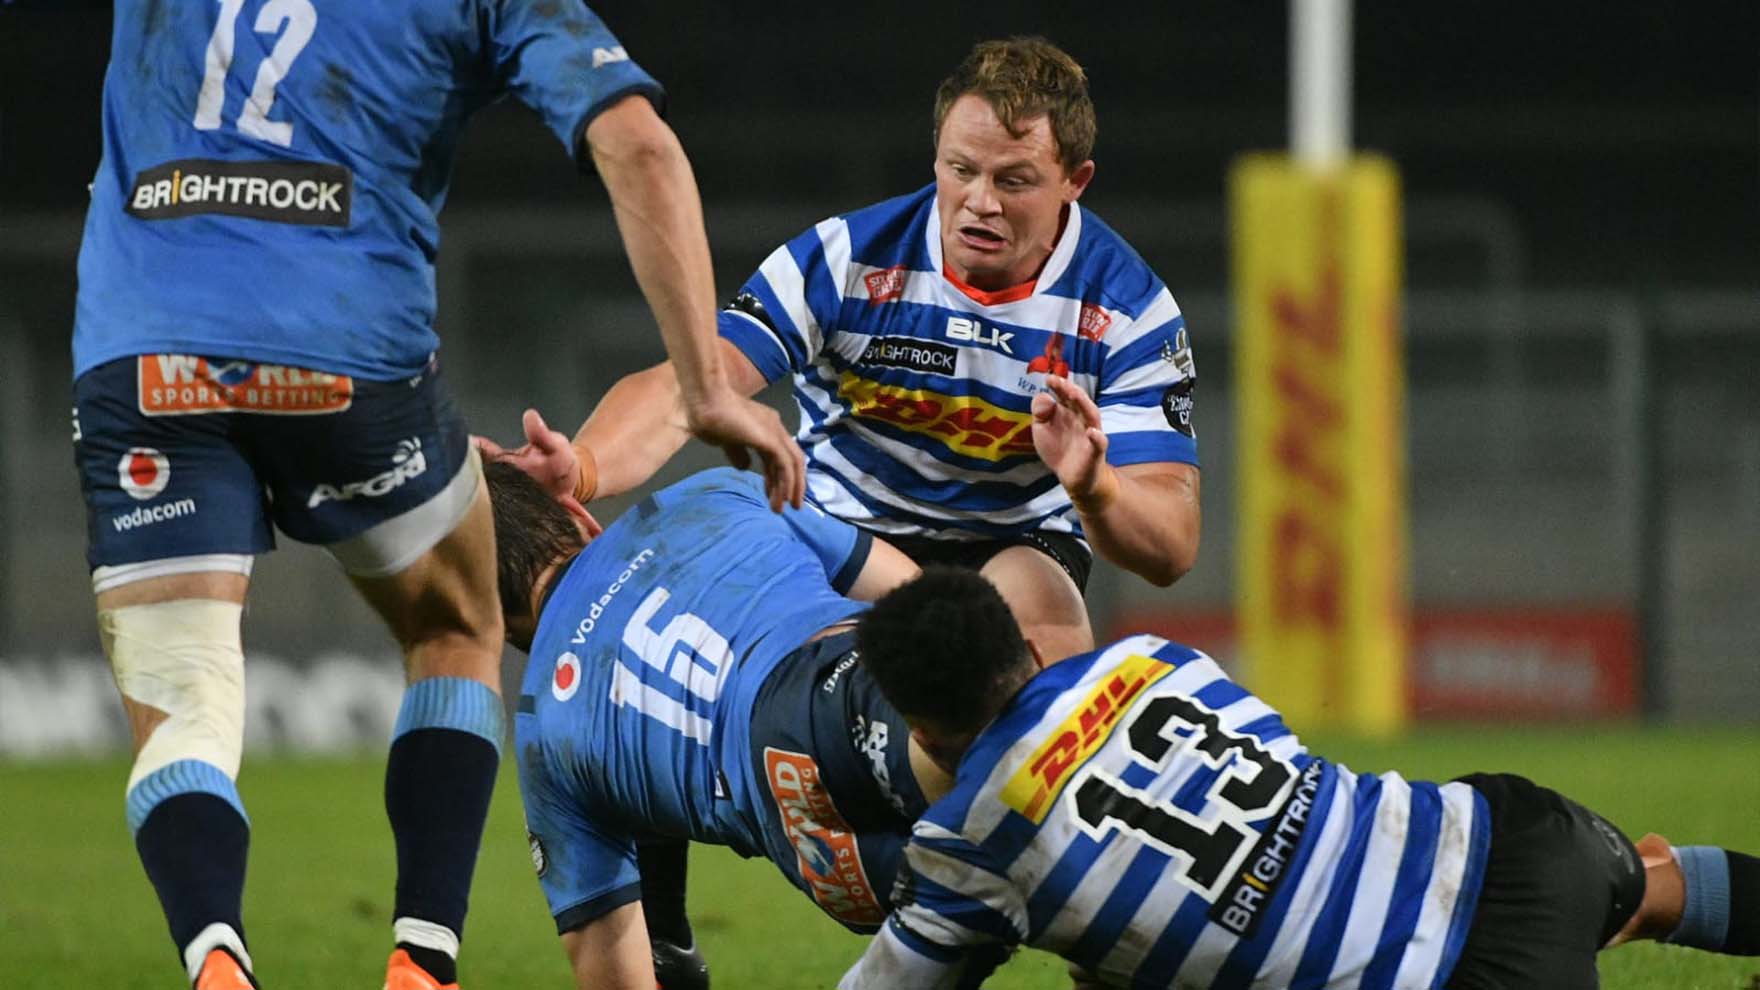 Deon Fourieof Western Province tackling a Blue Bulls player during the Currie Cup tournament